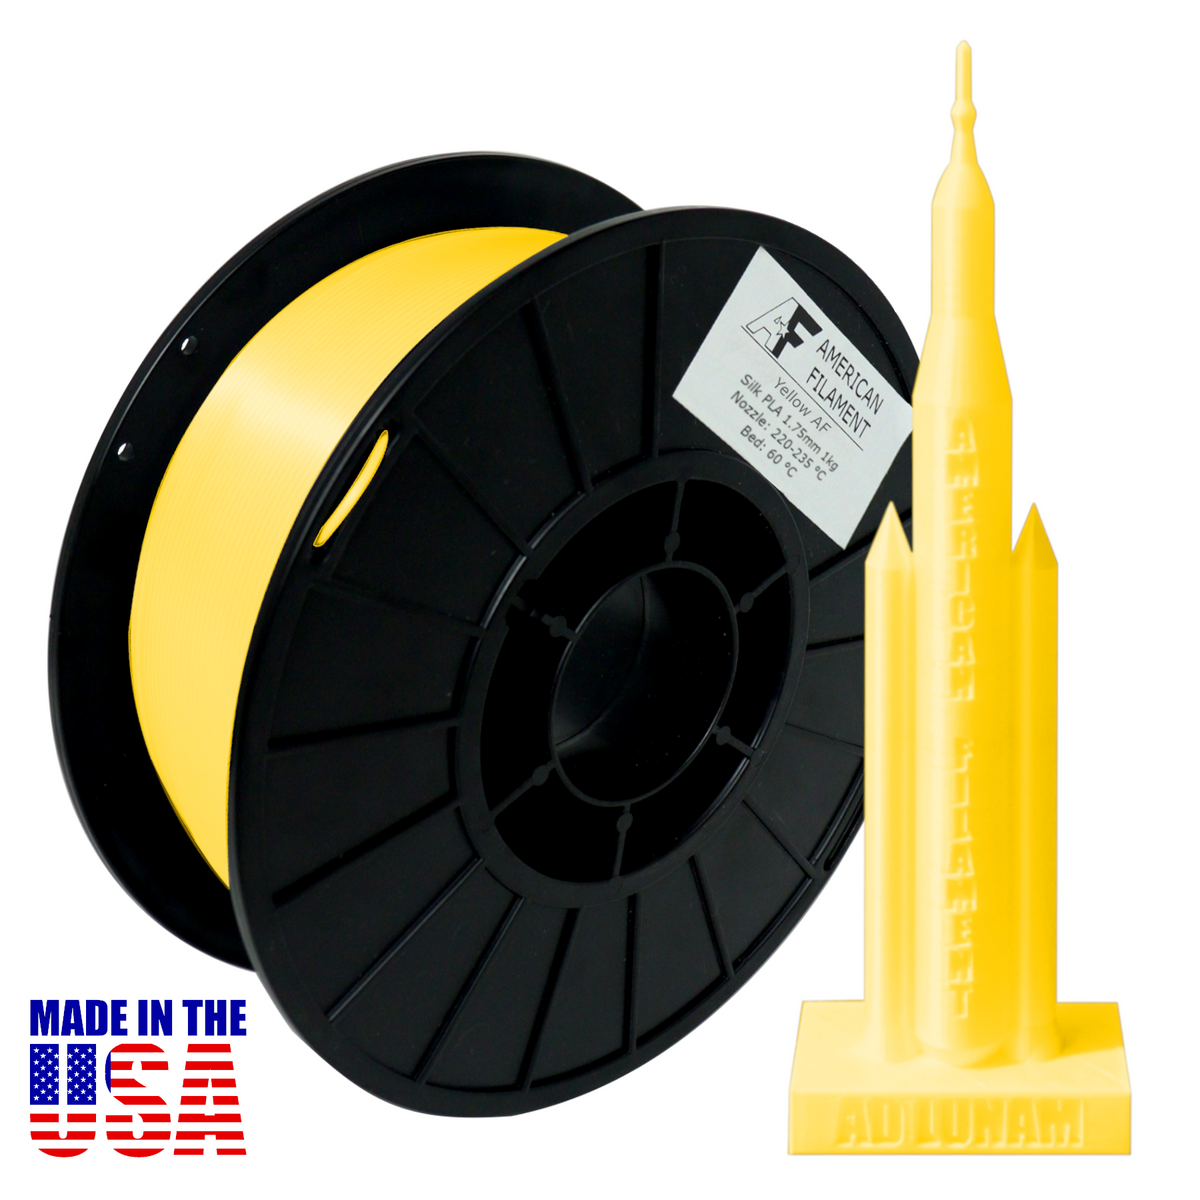 Yellow AF Silky 1.75mm PLA Filament - Made in the USA! – American Filament